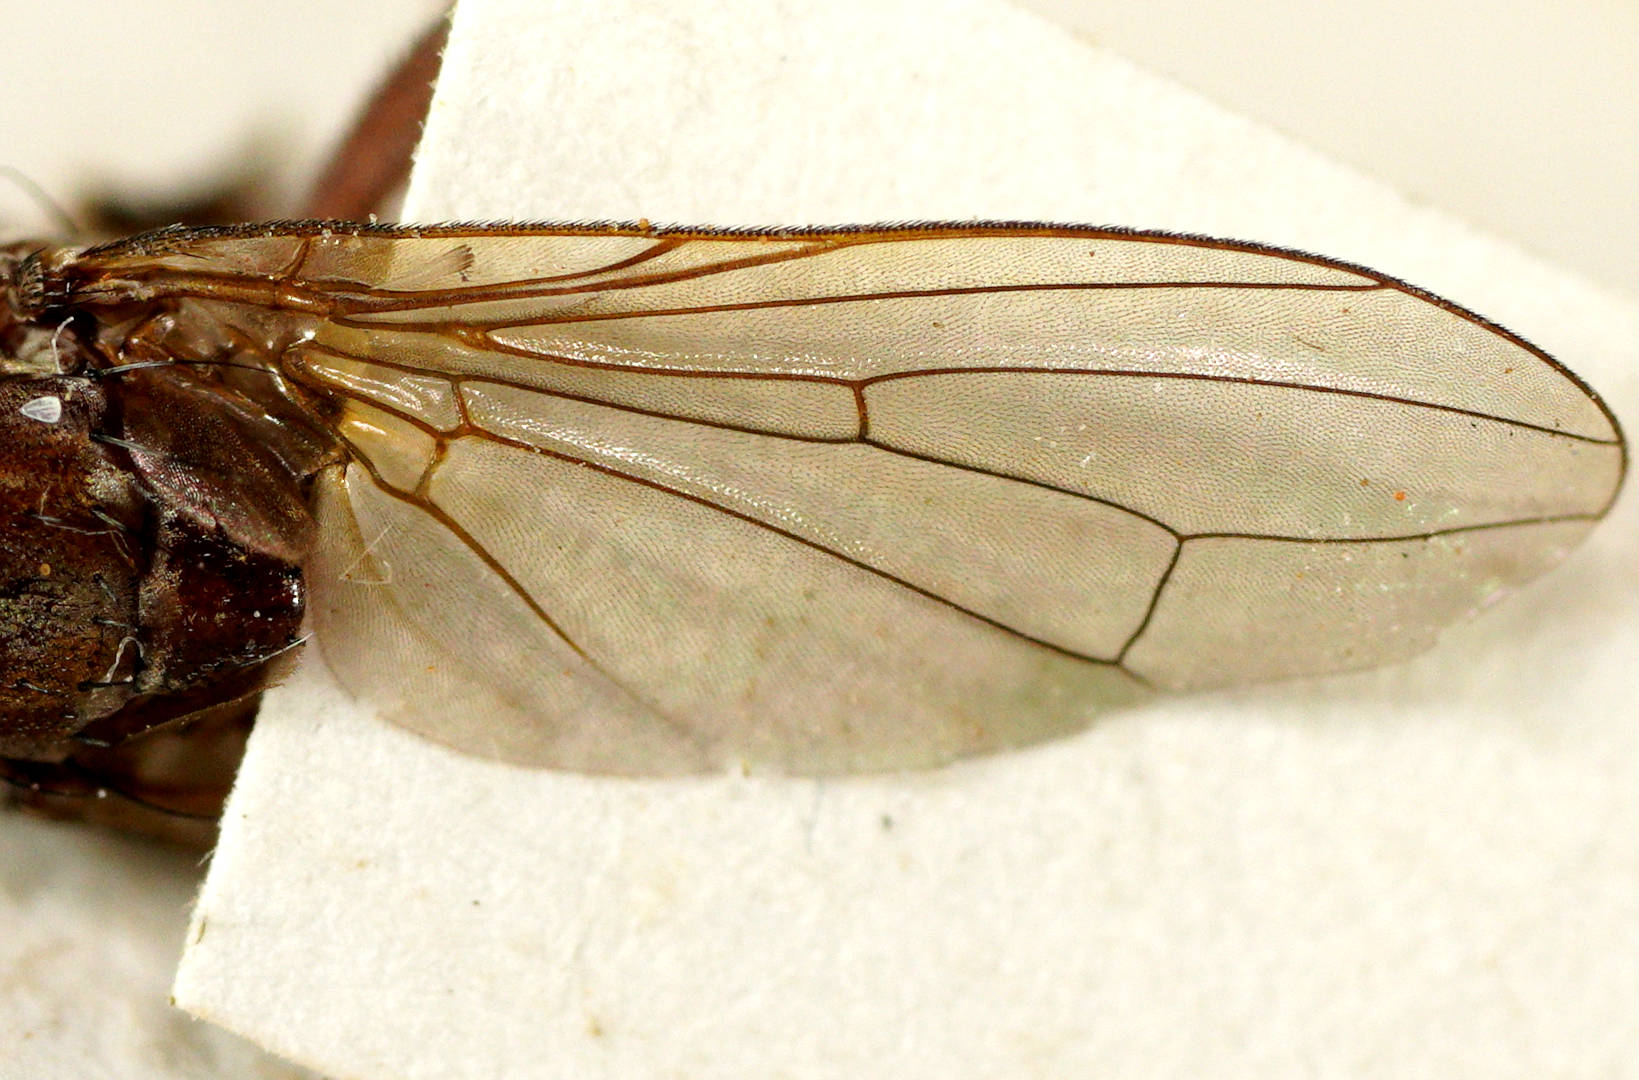 Striped Sun Fly (Tapeigaster nigricornis)